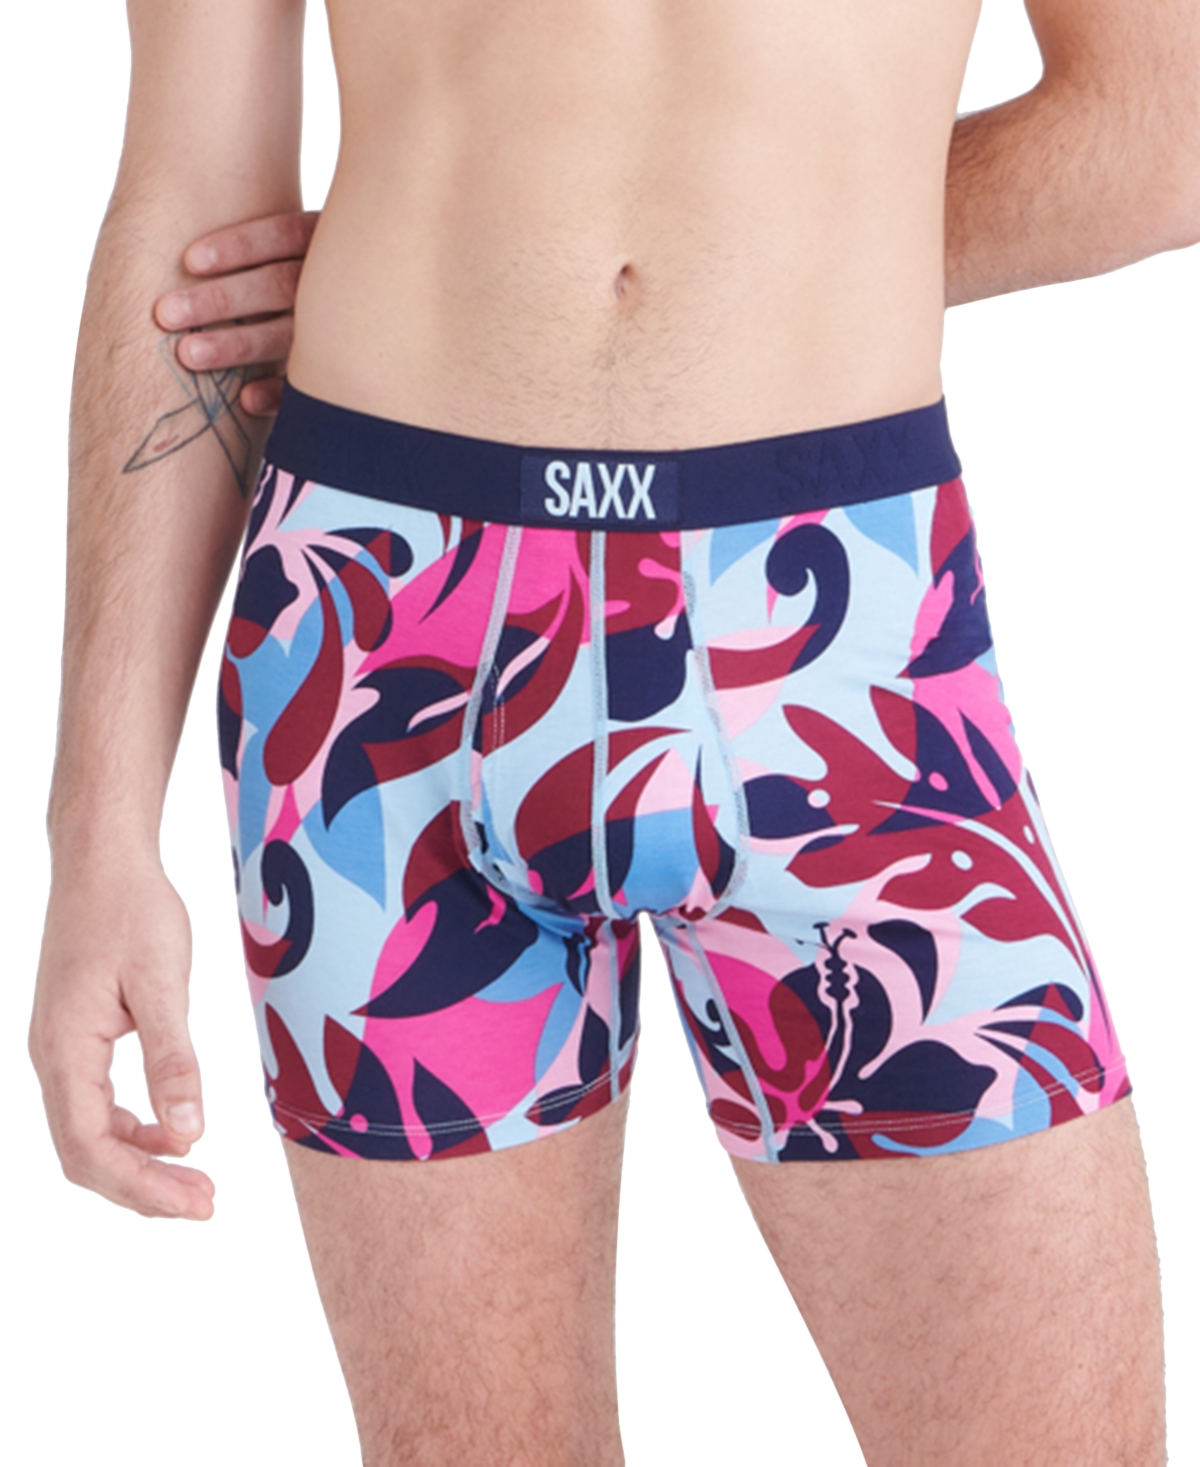 SAXX MEN'S ULTRA SUPER SOFT RELAXED-FIT MOISTURE-WICKING PRINTED BOXER BRIEFS